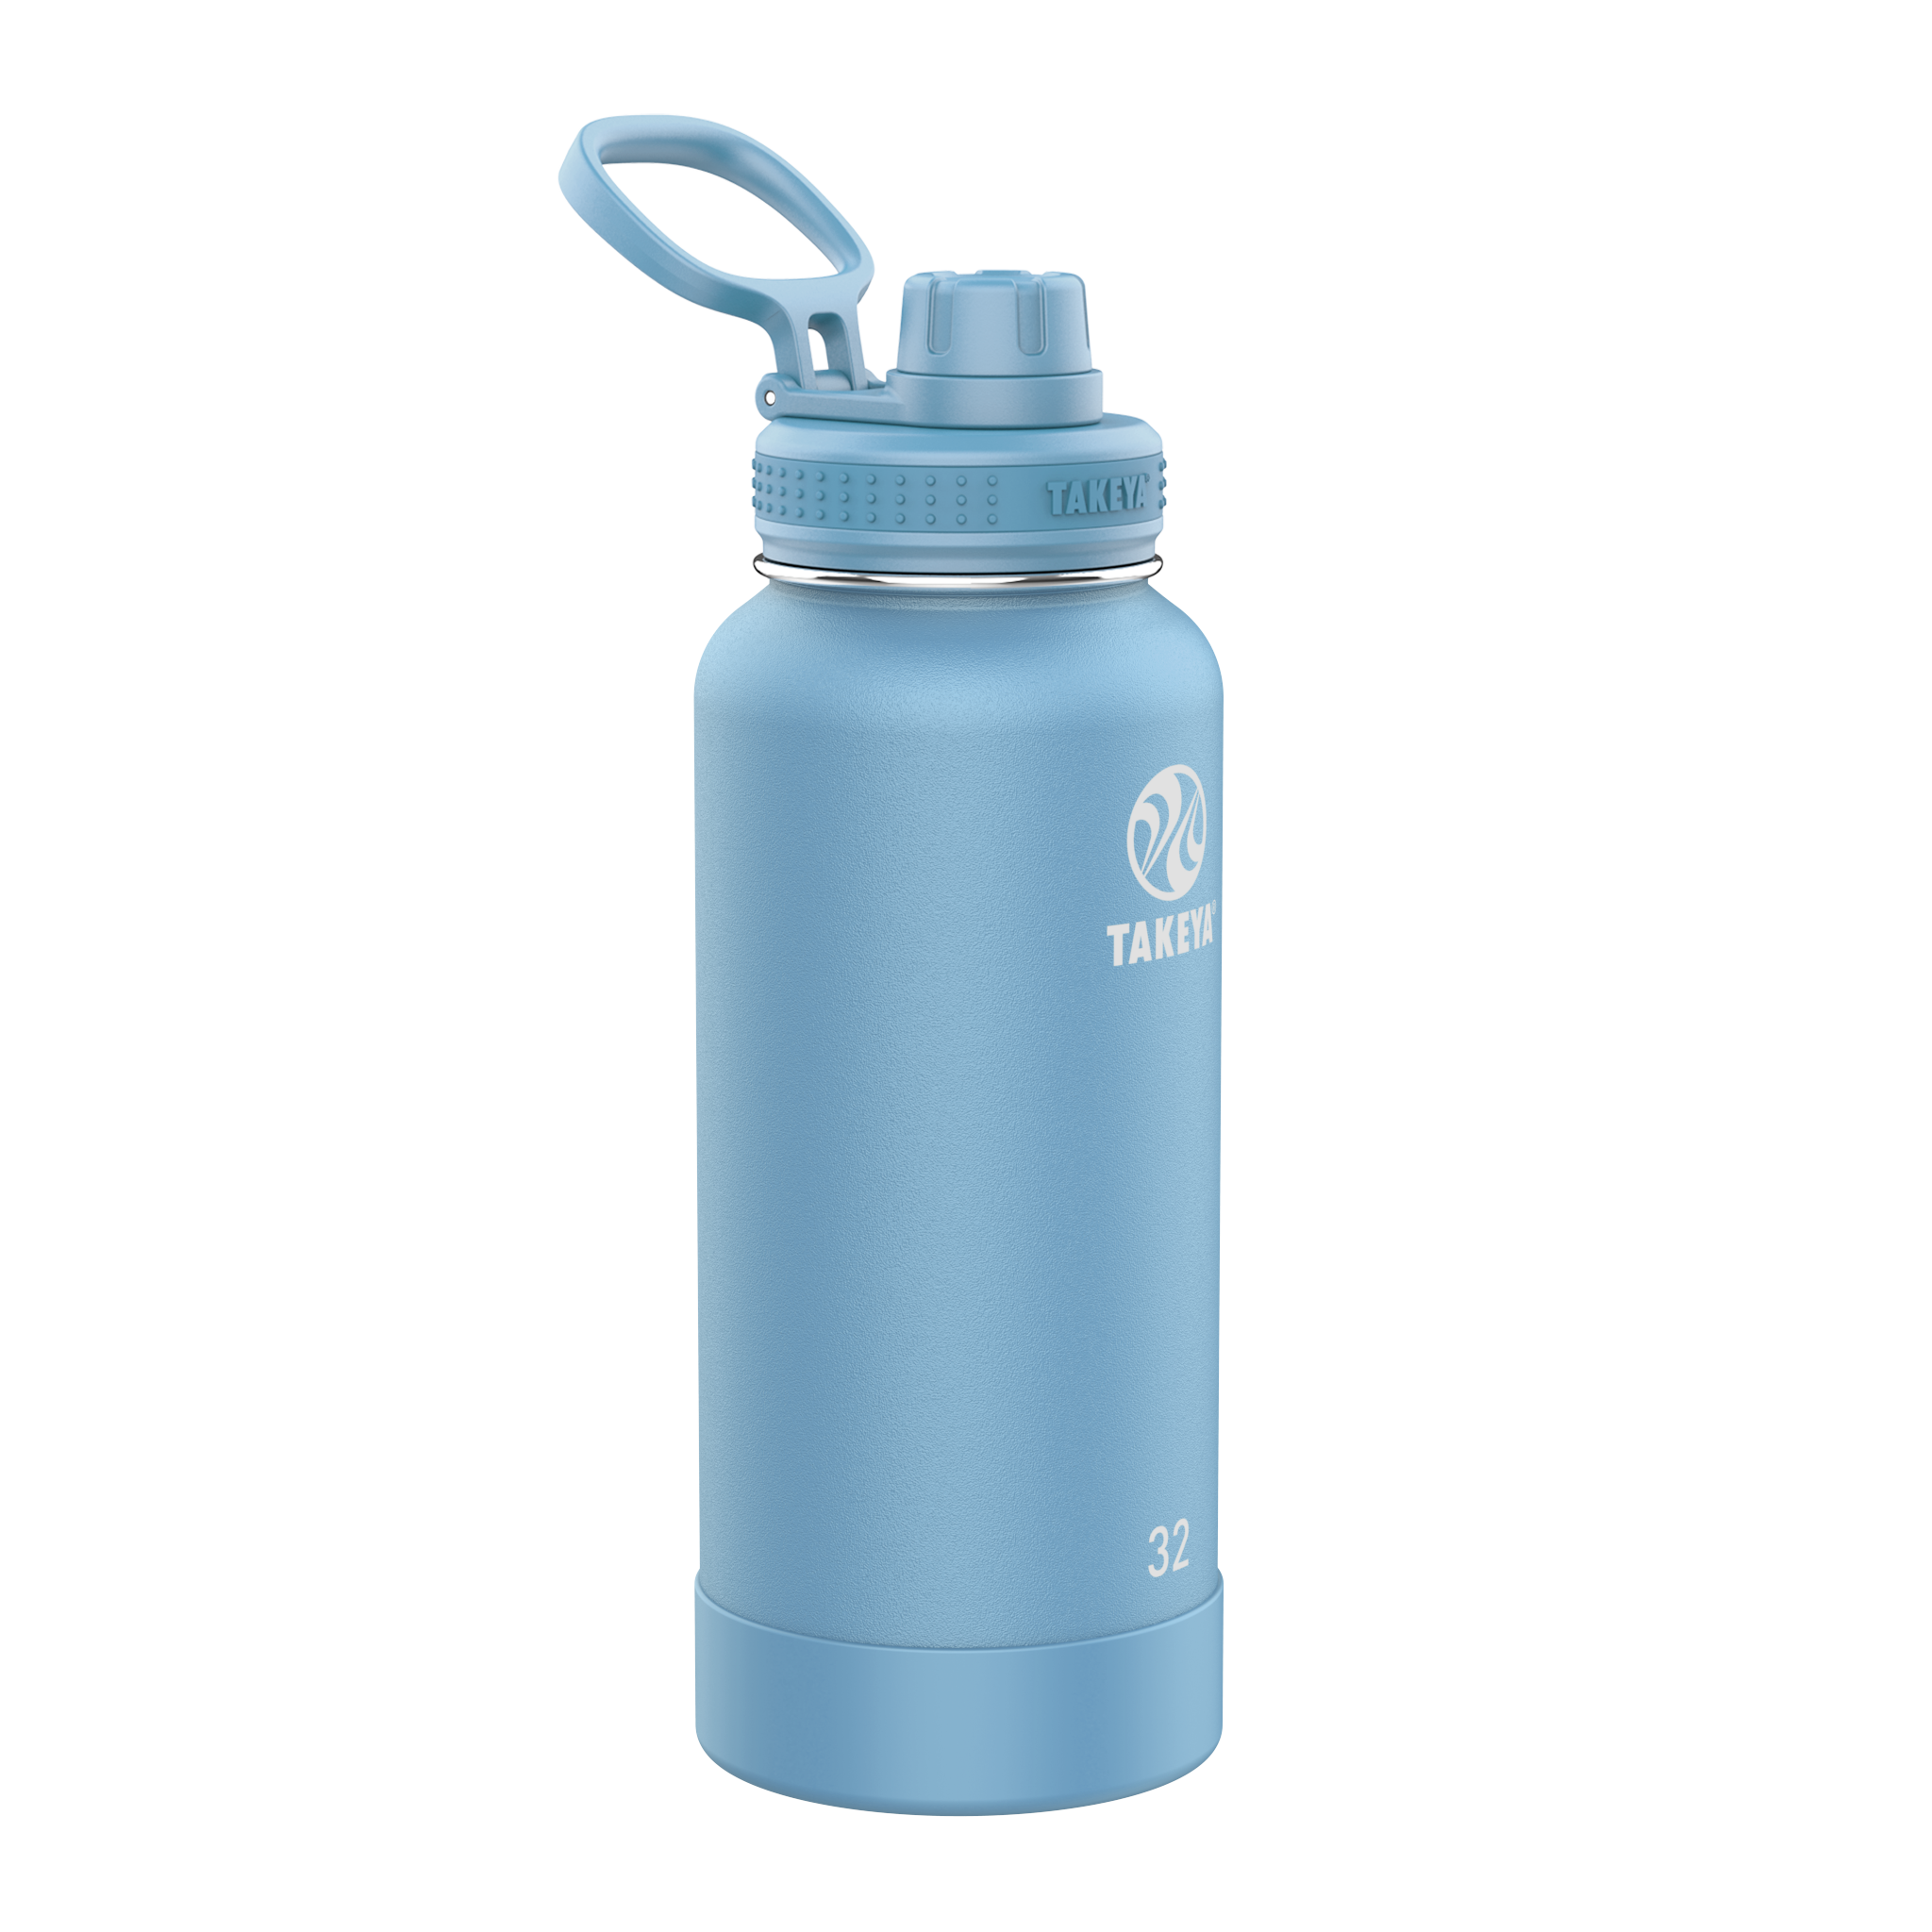 Bene Casa 32-oz Double-Walled Insulated Thermos ,Blue